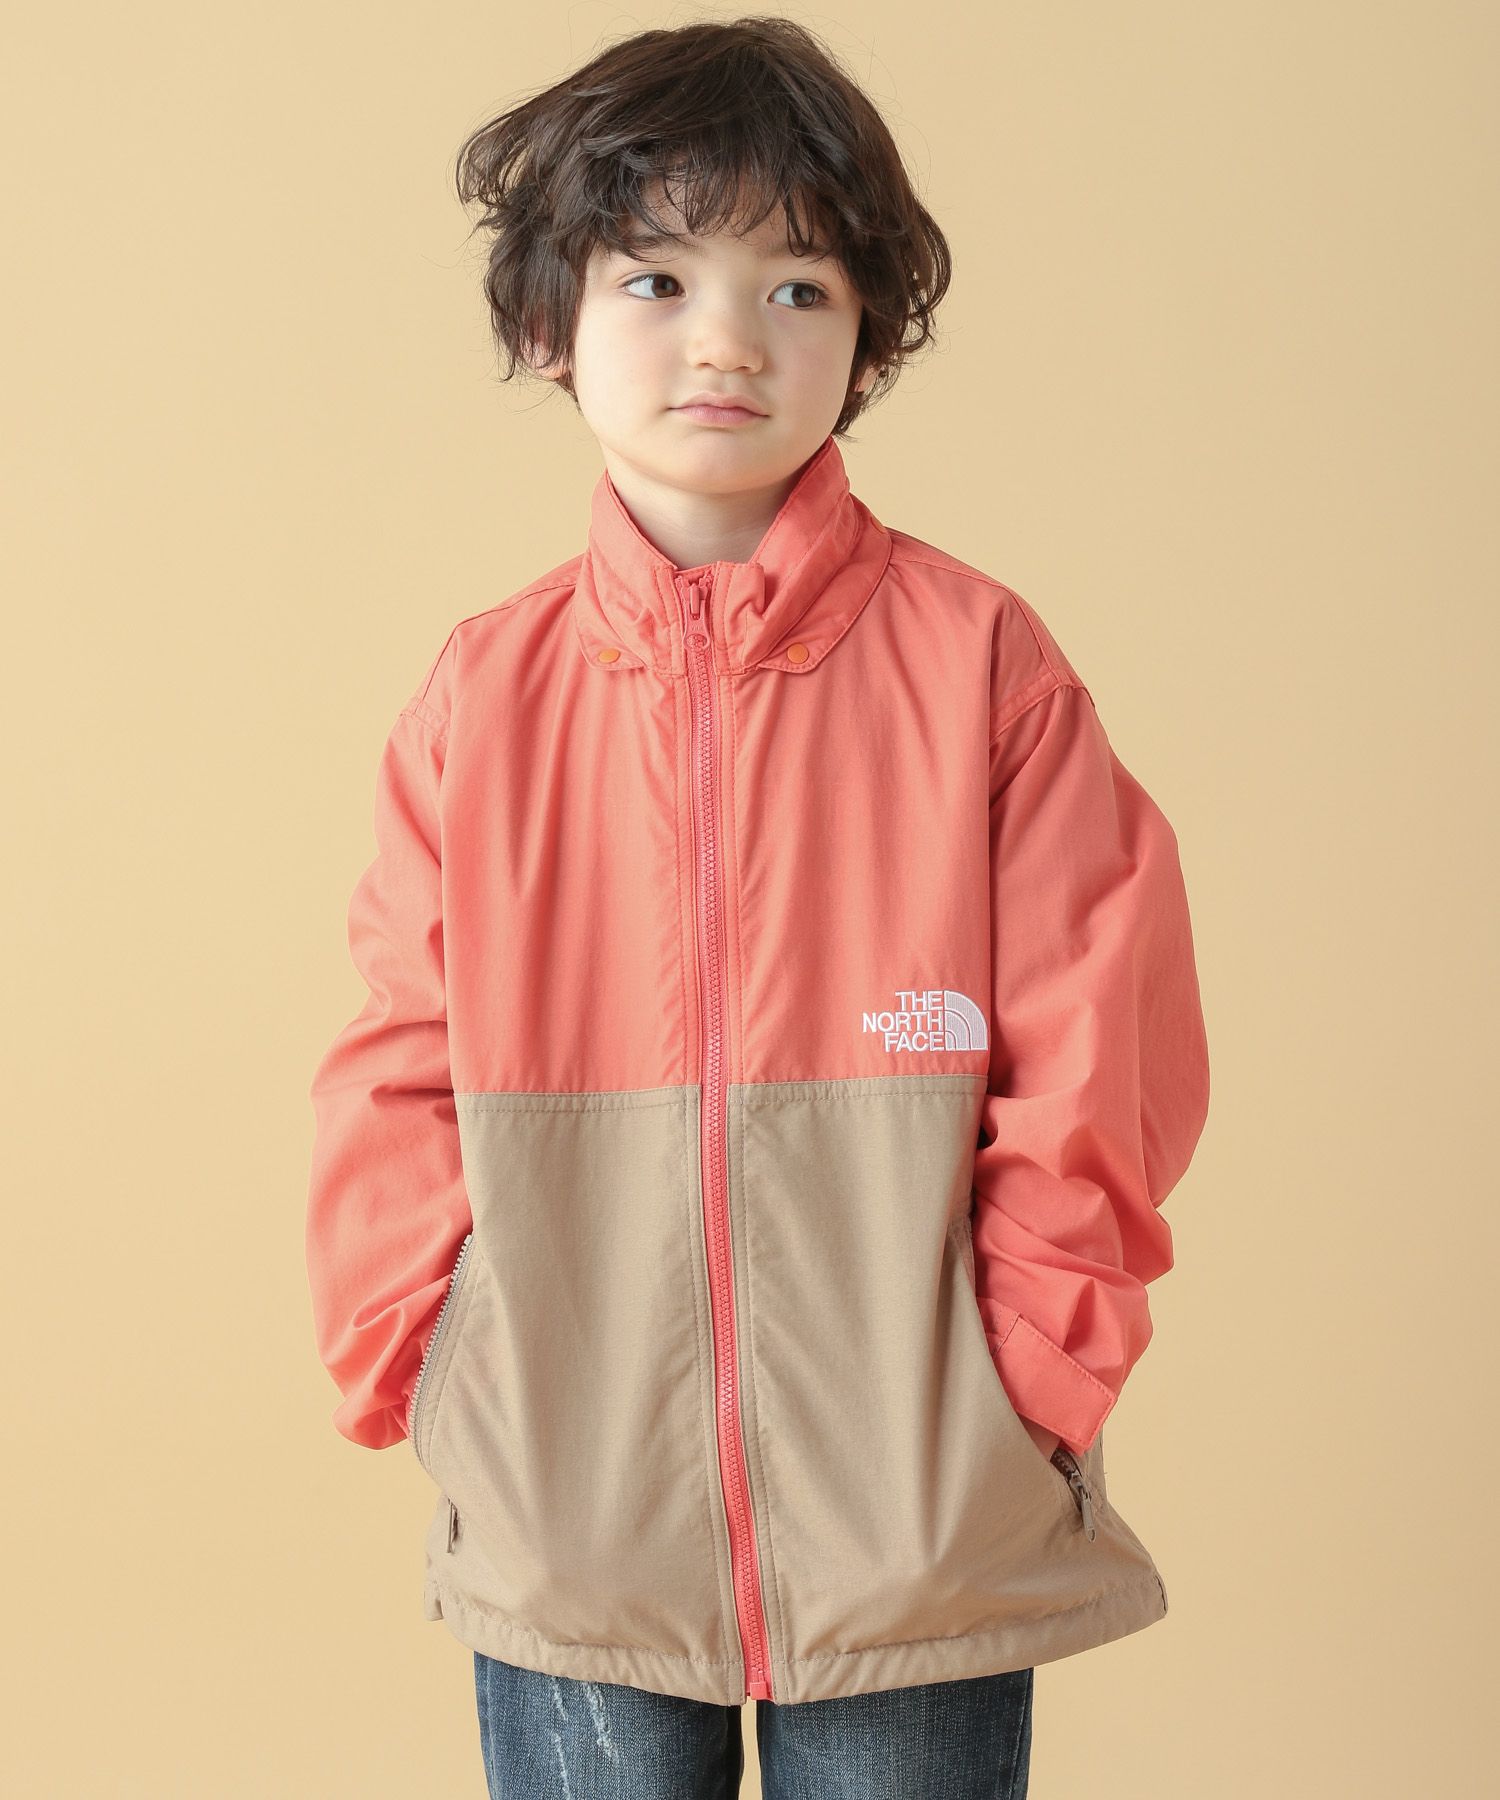 THE NORTH FACE　コンパクトジャケット　130cm